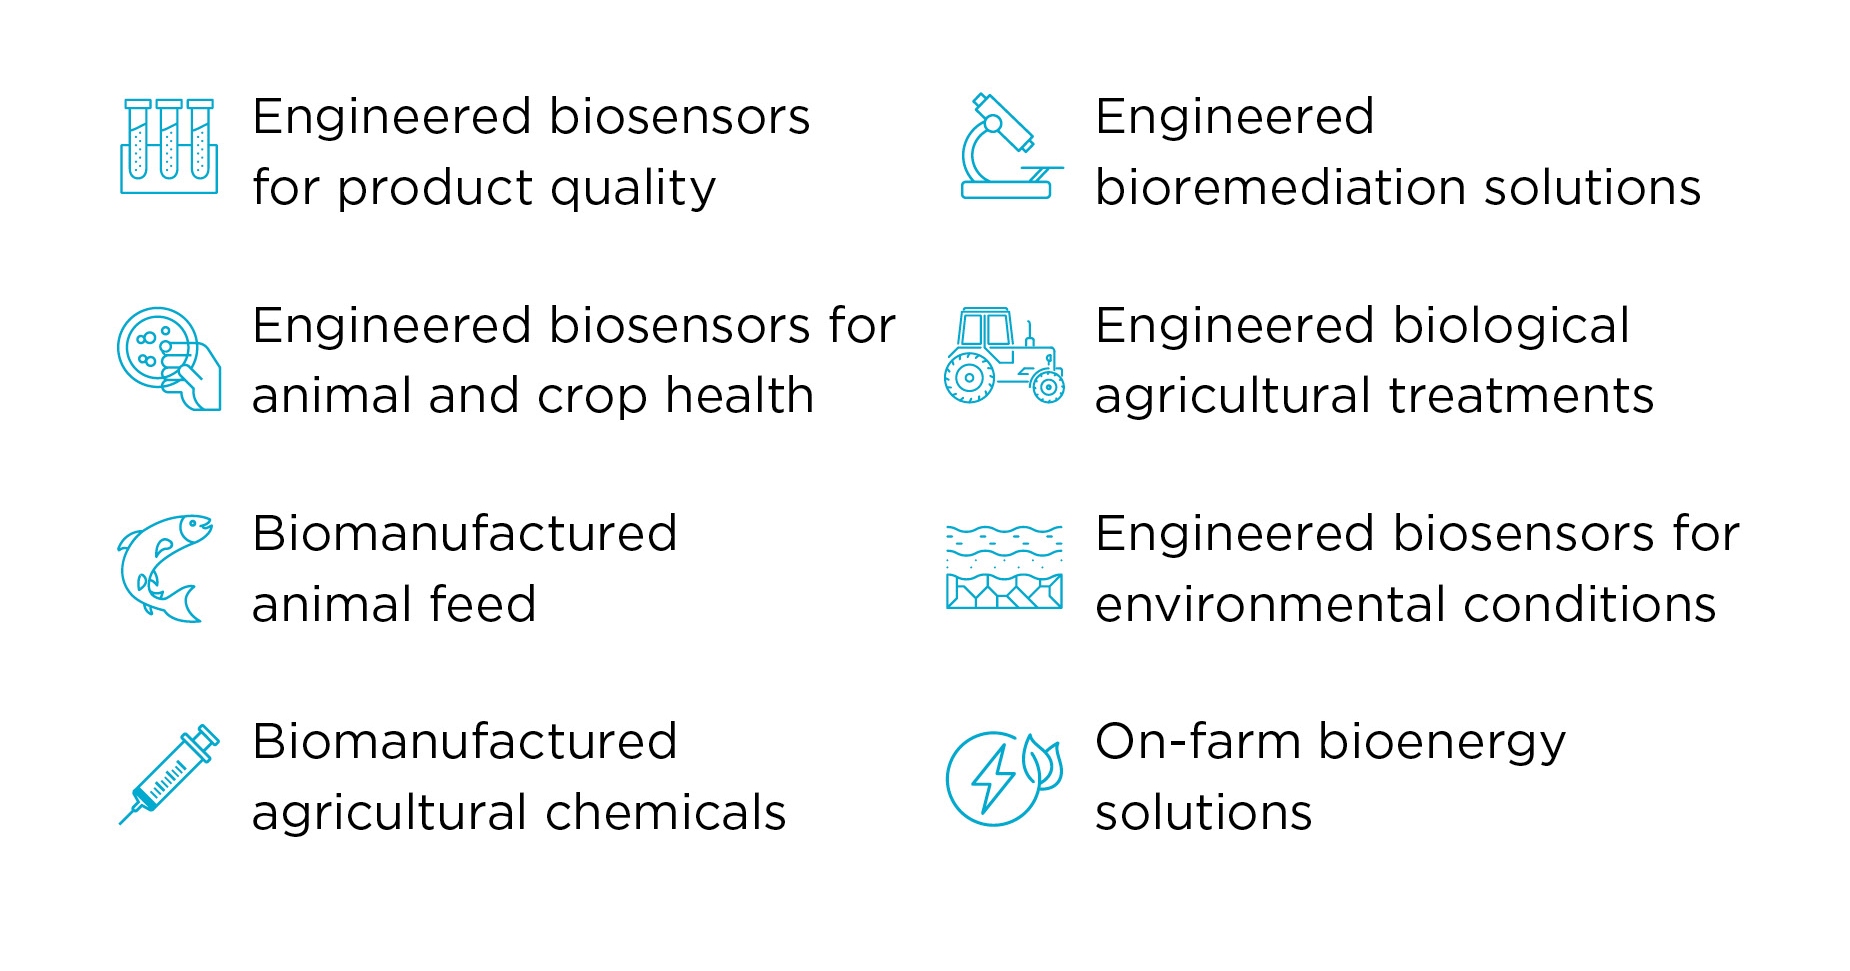 The eight opportunities include:  Engineered biosensors for product quality, Engineered biosensors for animal and crop health, Bio manufactured animal feed, Biomanufactured agricultural chemicals, Engineered bioremediation solutions, Engineered biological agricultural treatments, Engineered biosensors for environmental conditions and On-farm bioenergy solutions